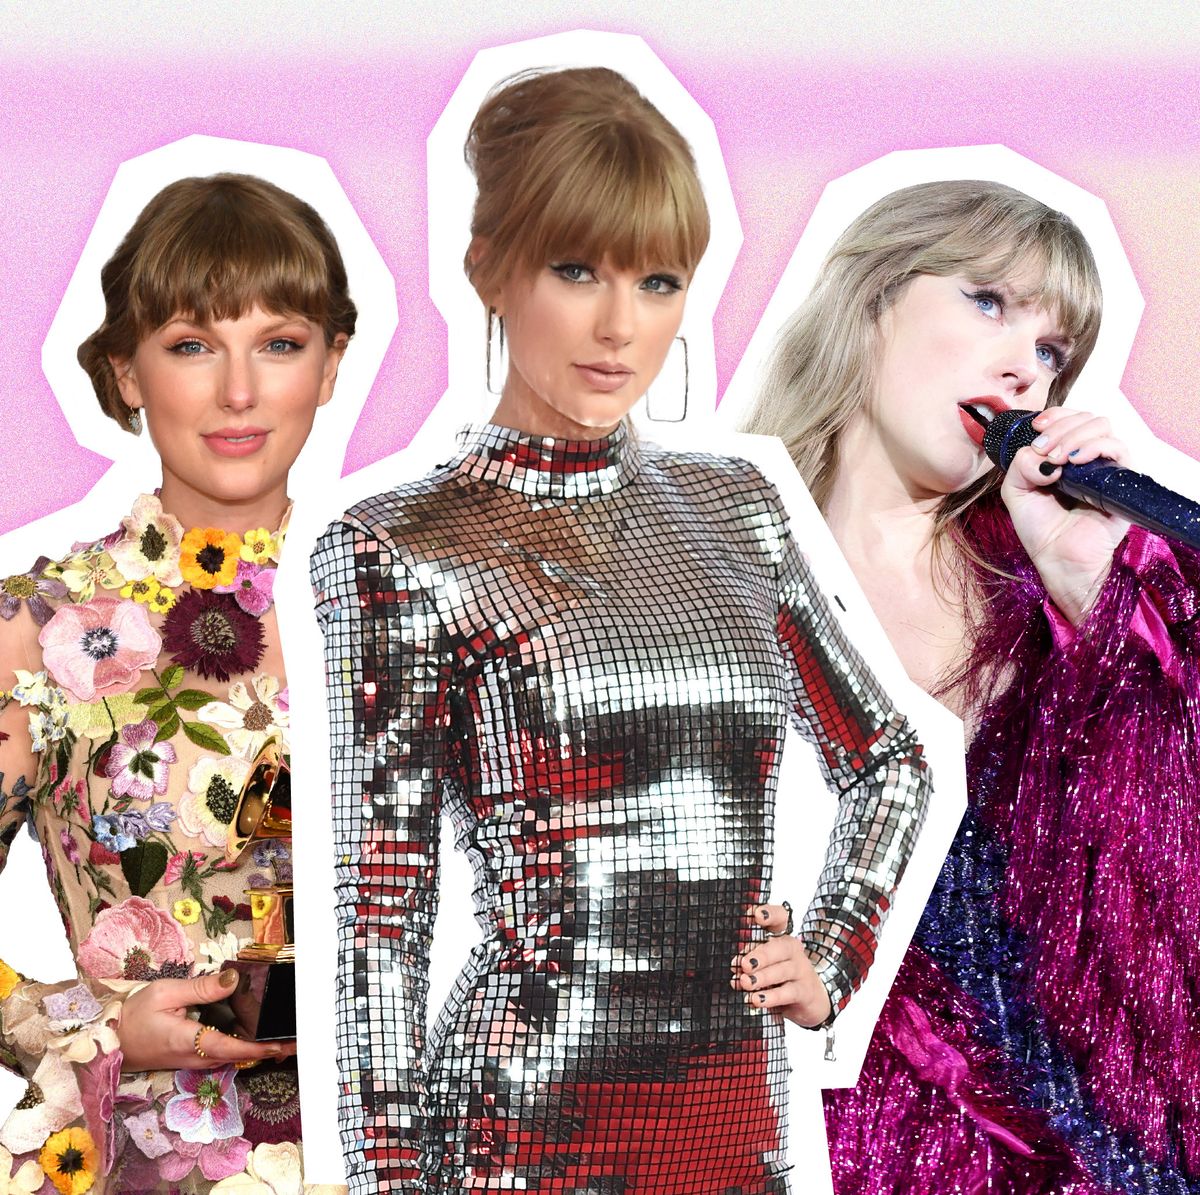 13 of The Best Taylor Swift Costume Ideas in 2023